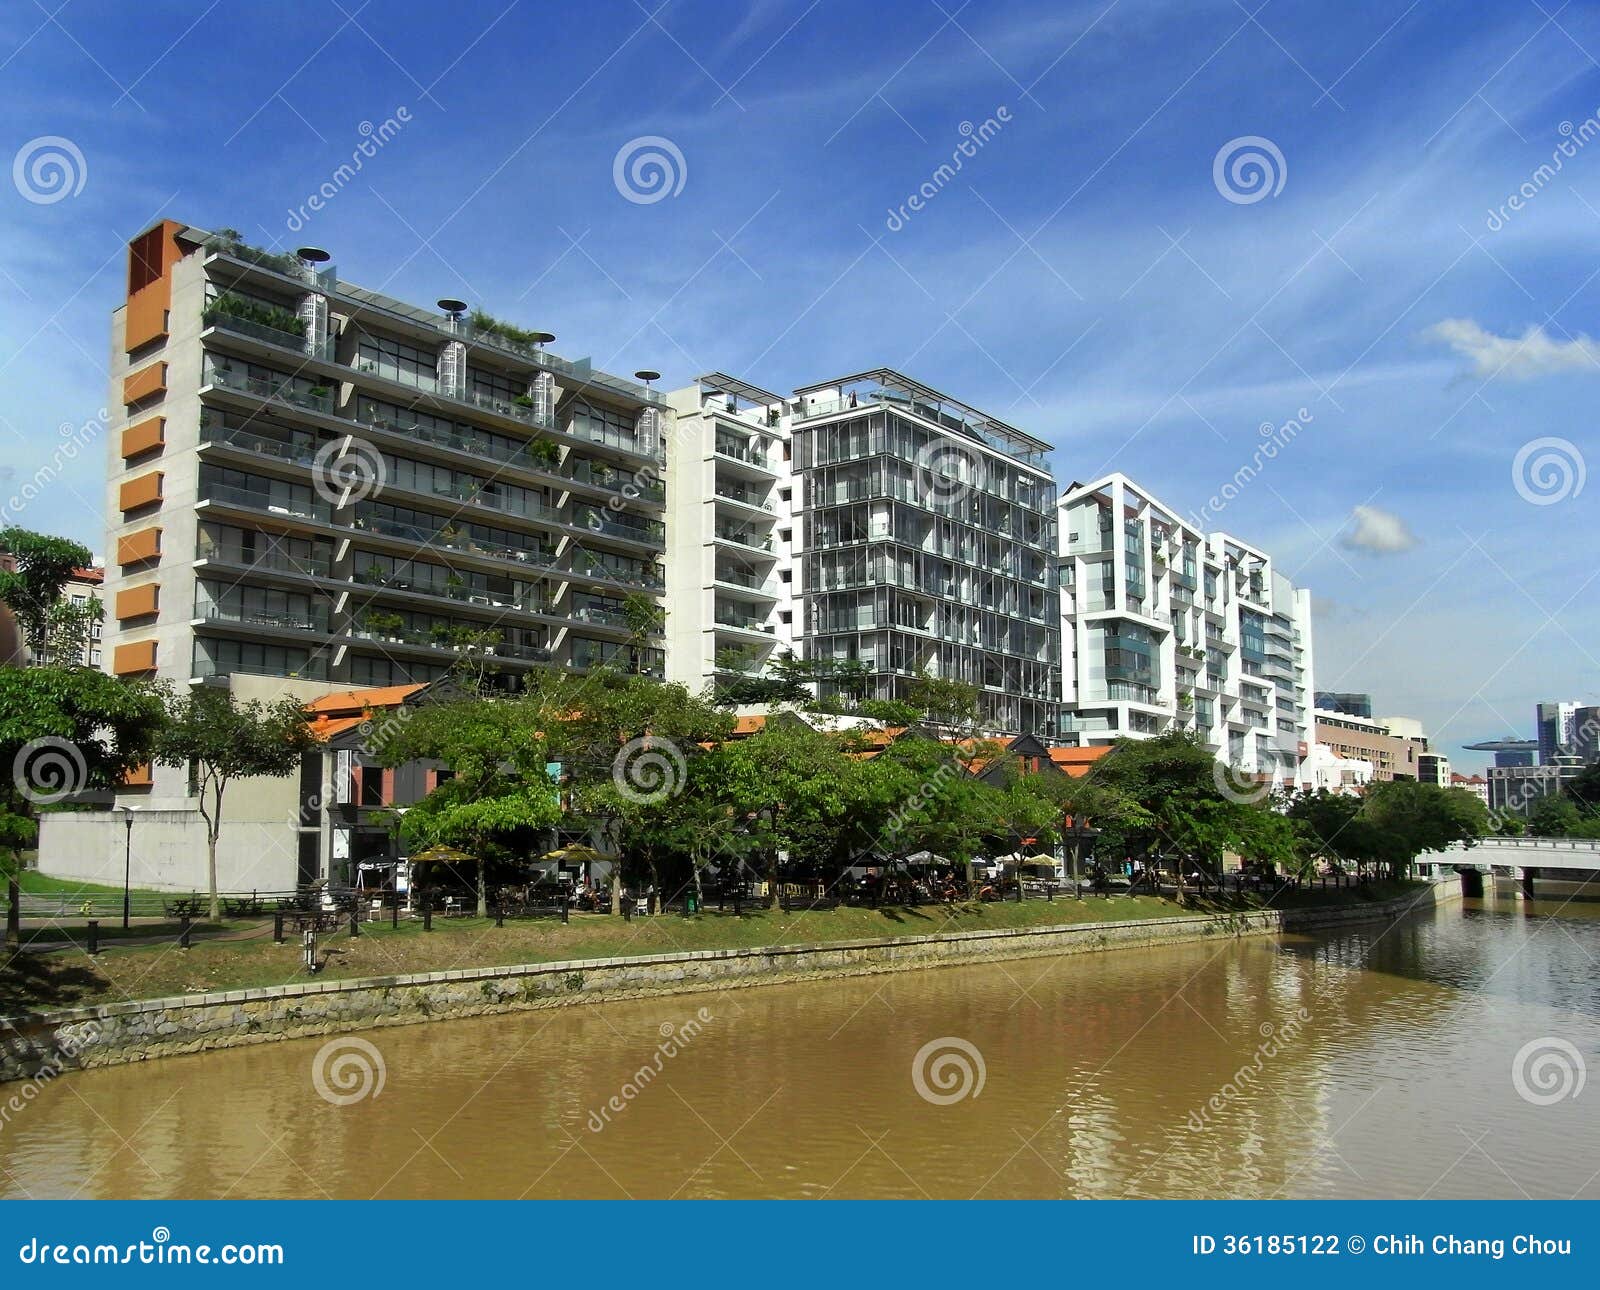 Scenic view of Riparian area or zone with high rise buildings and ...